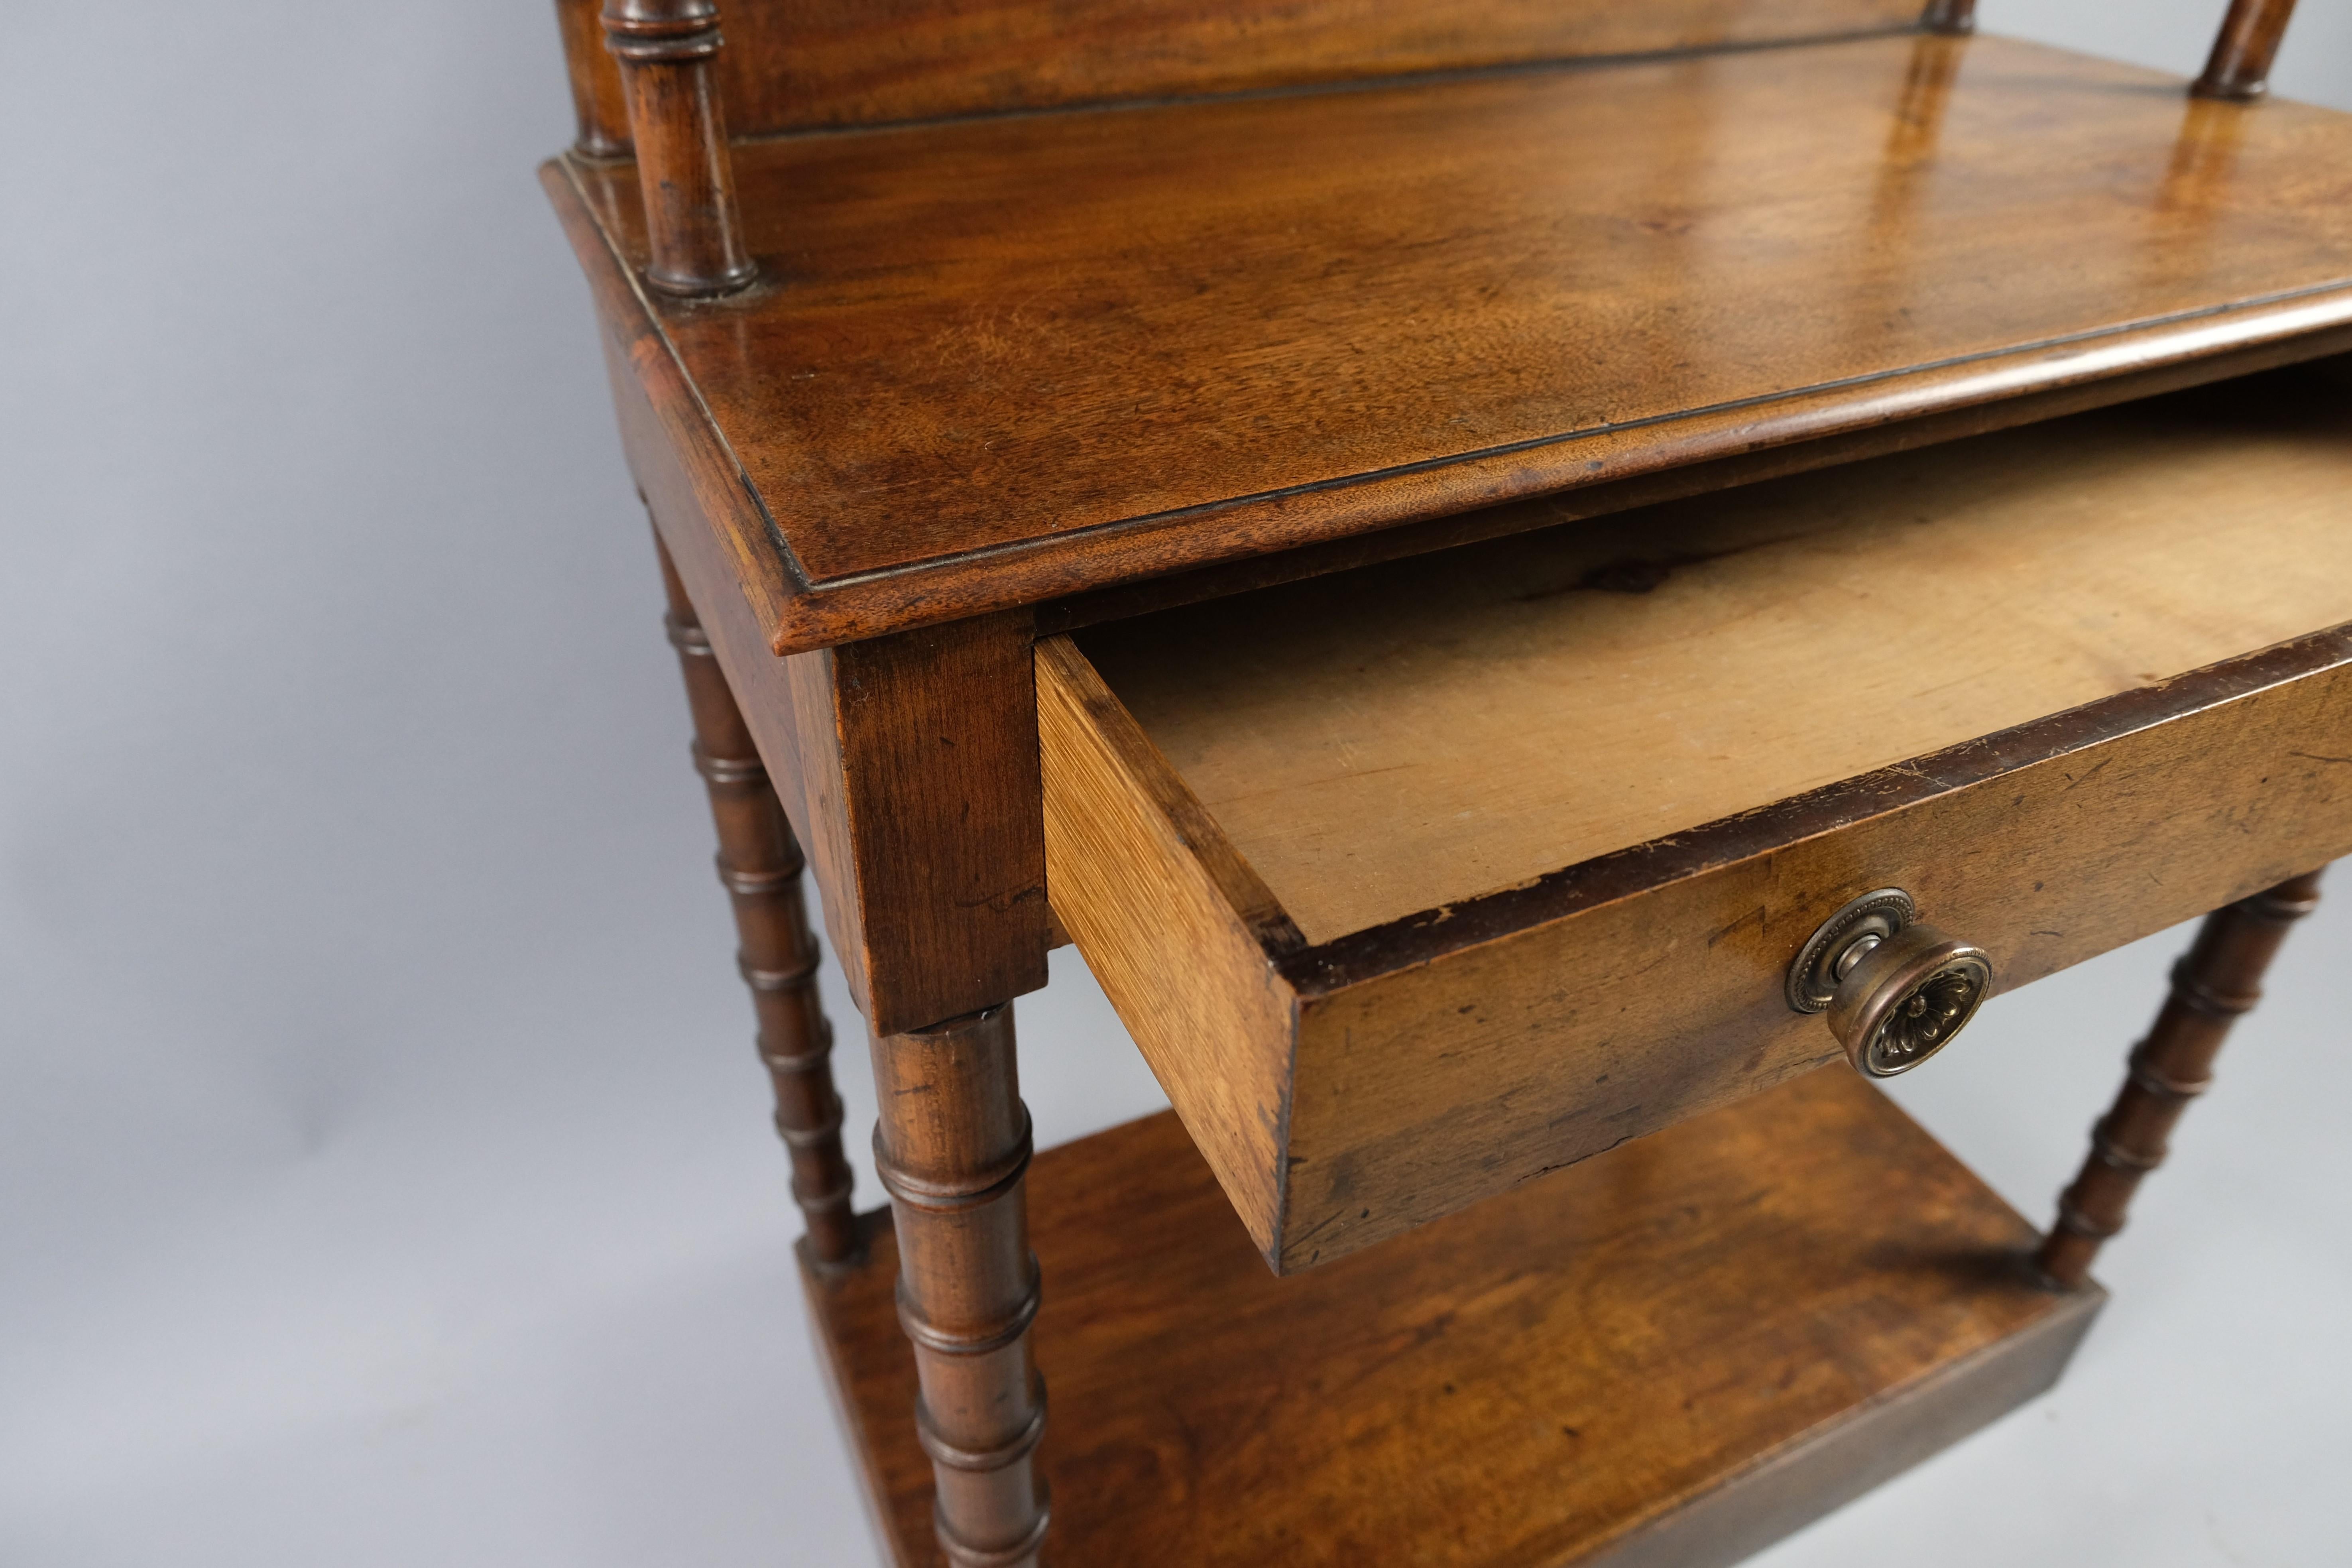 Hutton-Clarke Antiques is delighted to present a distinctive Regency Mahogany Open Bookcase, crafted around 1830. This piece is a unique find, featuring an open bookcase atop a fixed open base, making it ideal for showcasing your cherished objects